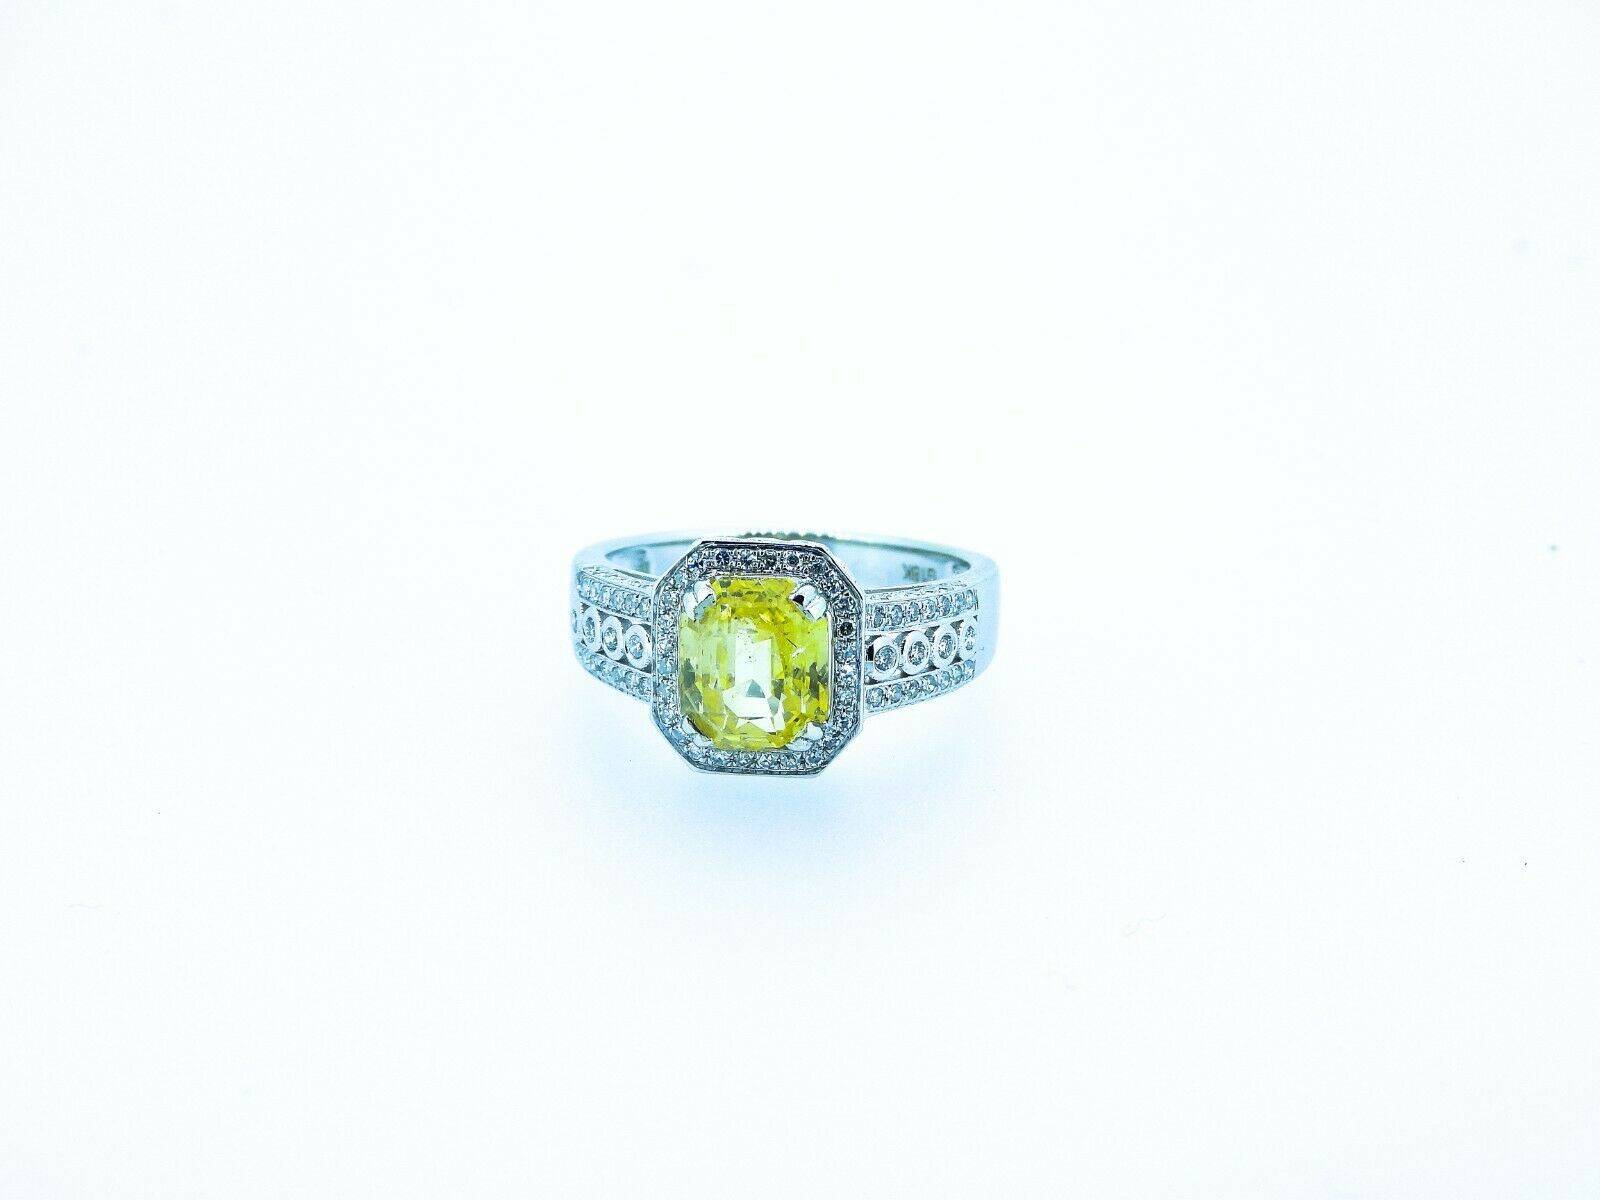 Certified 3.20 ct Yellow VVS Untreated Sapphire & Diamonds Ring - Image 5 of 8